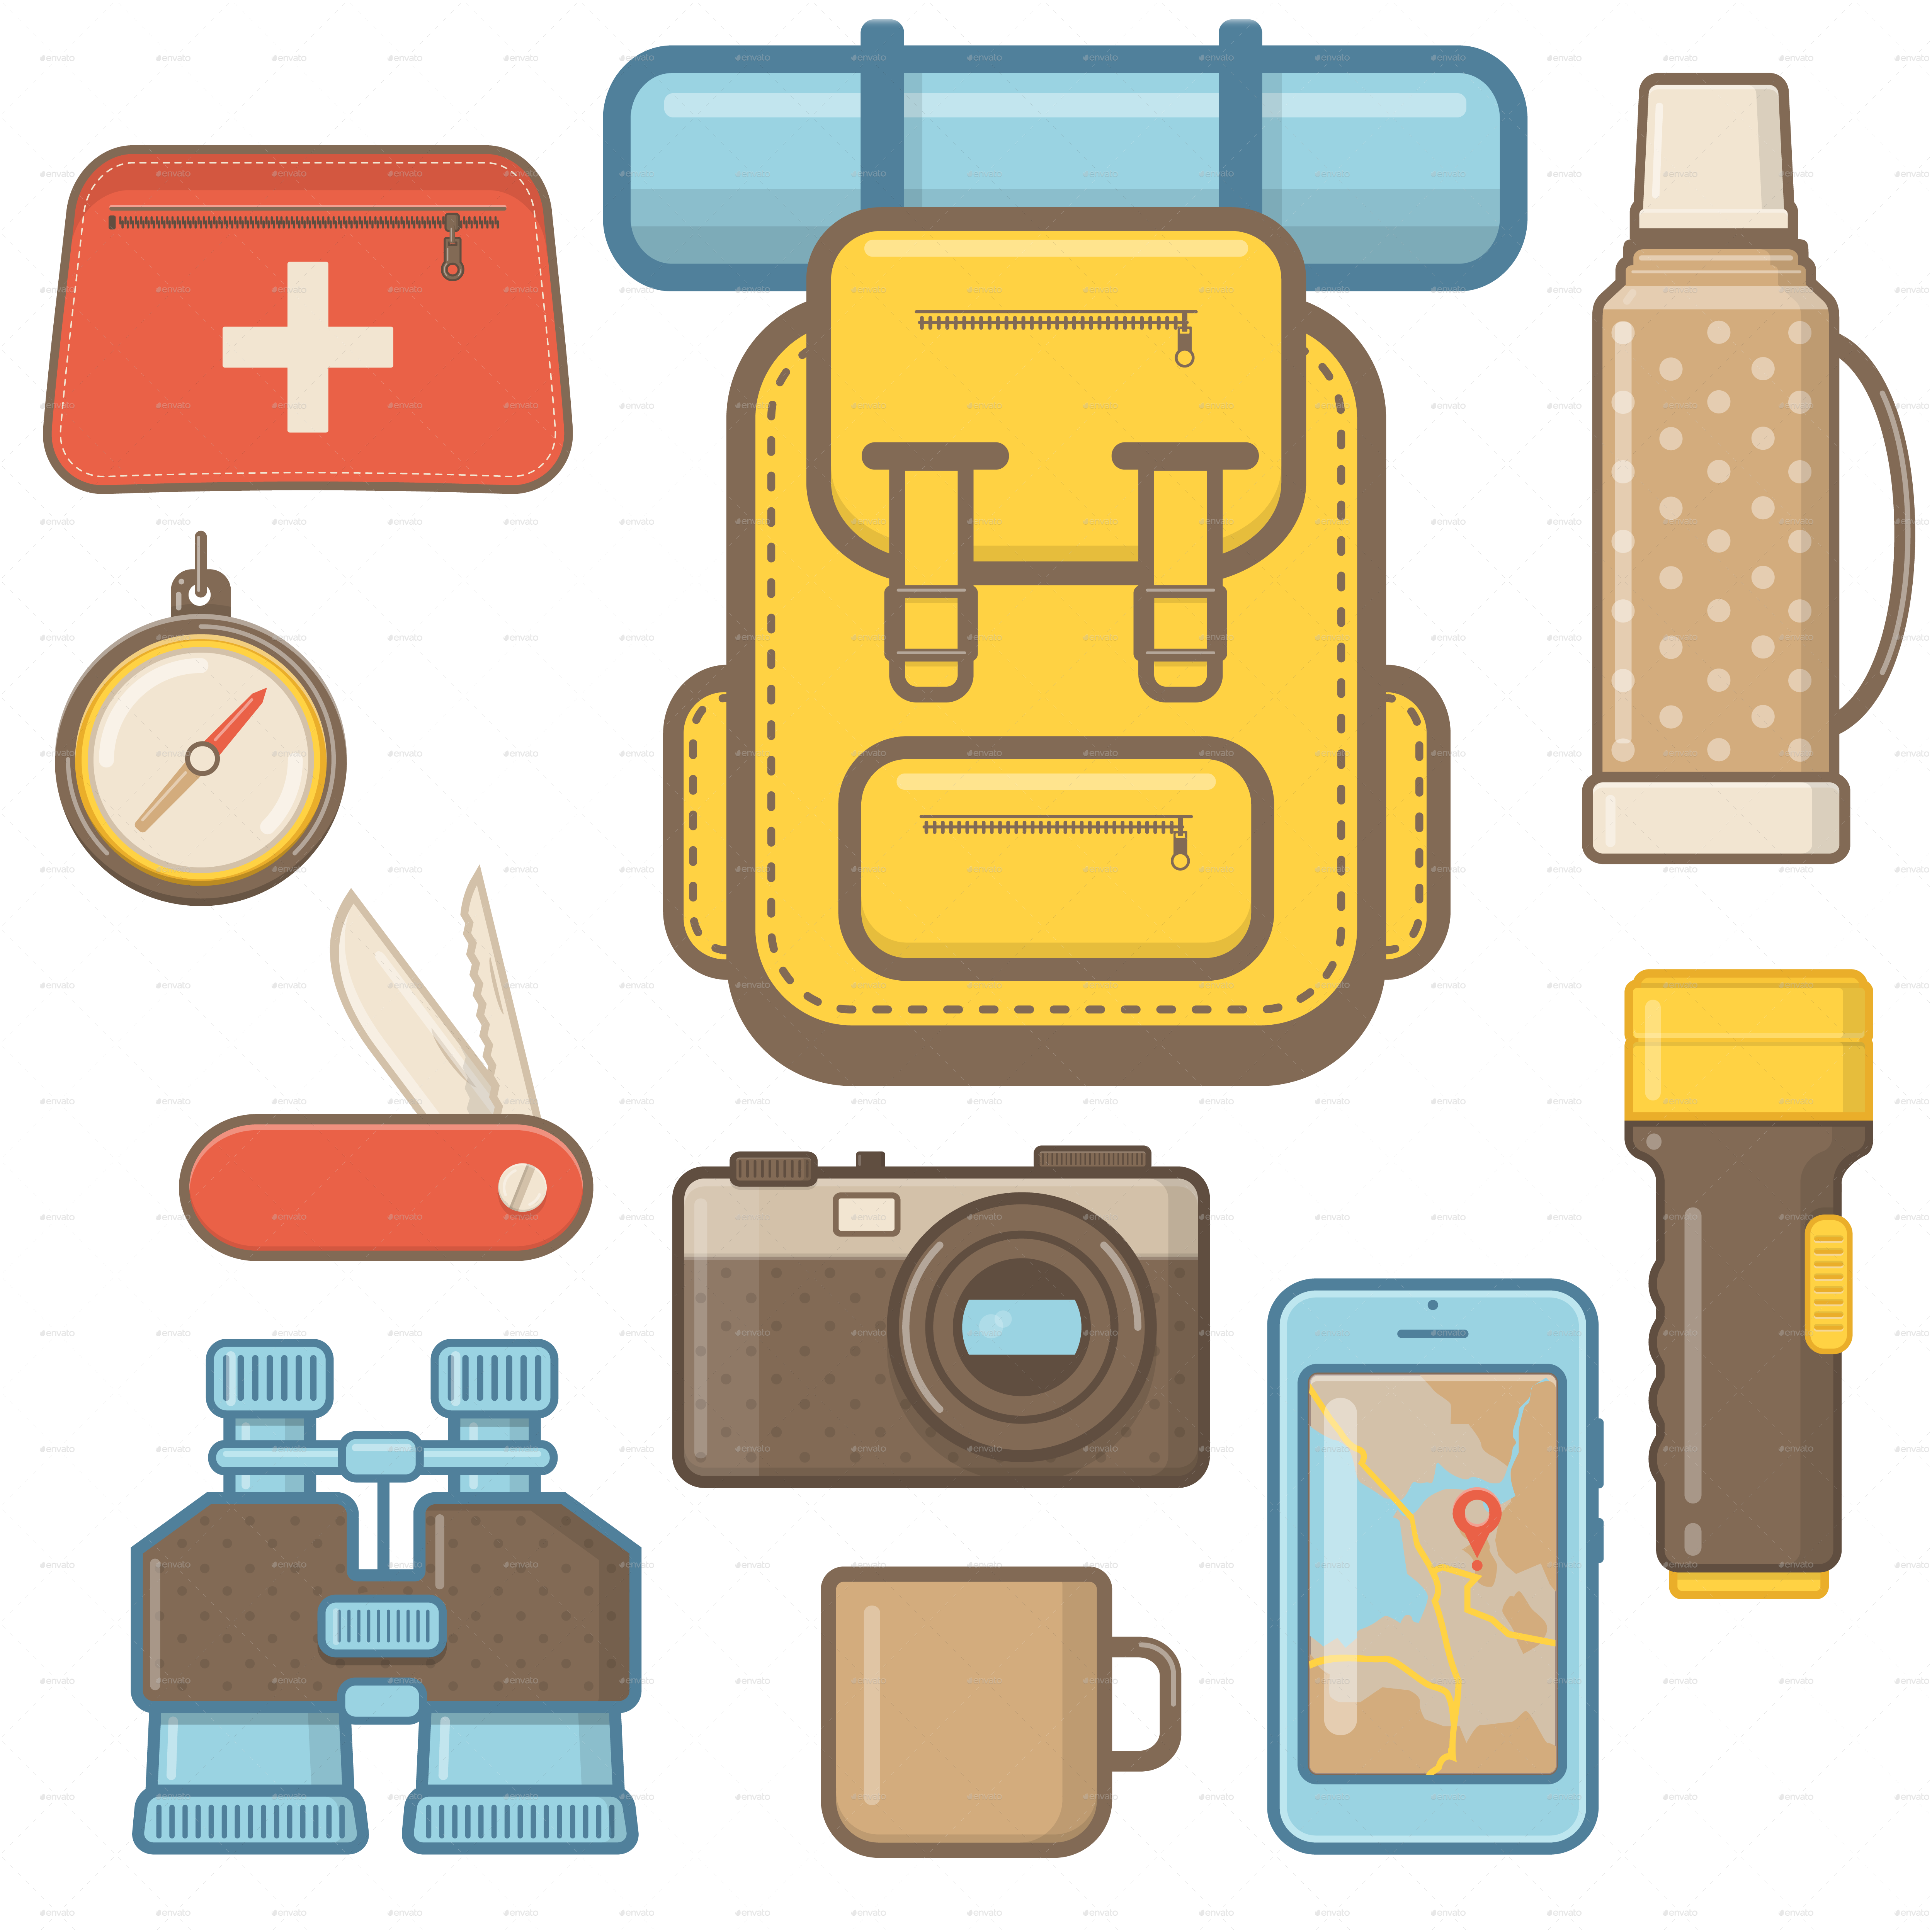 And hiking equipment elements. Hike clipart camping